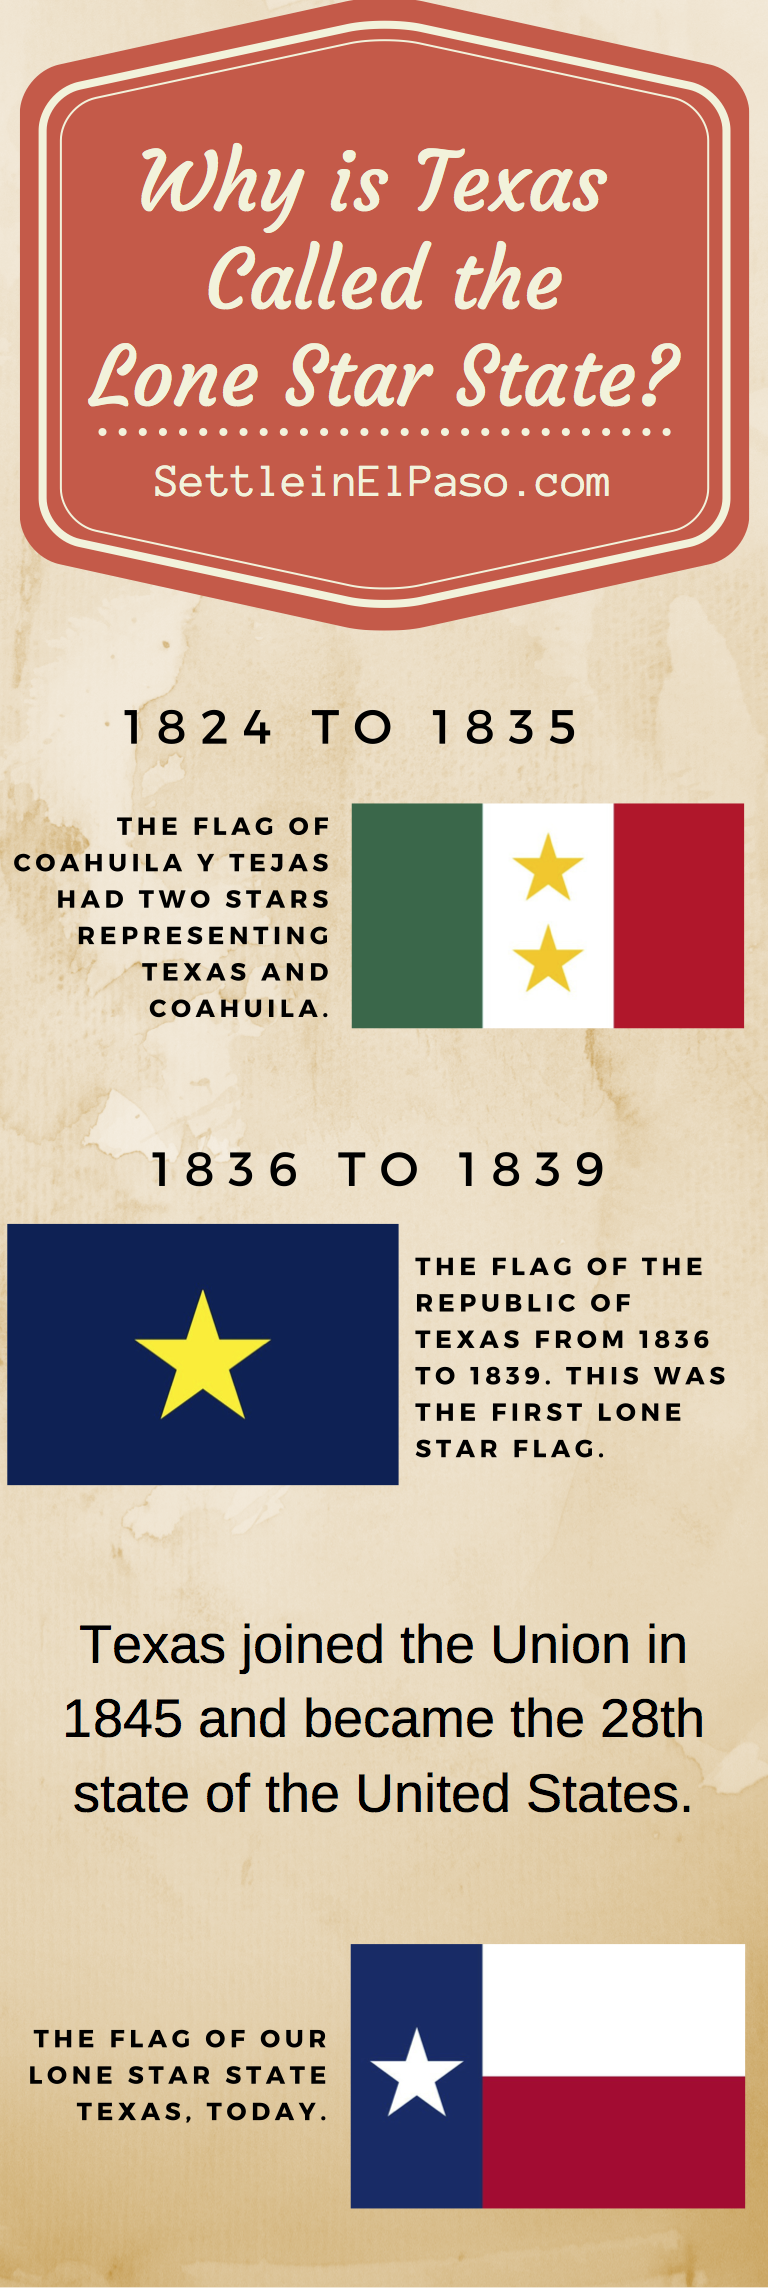 Texas is called the Lone Star State. Do you know why?